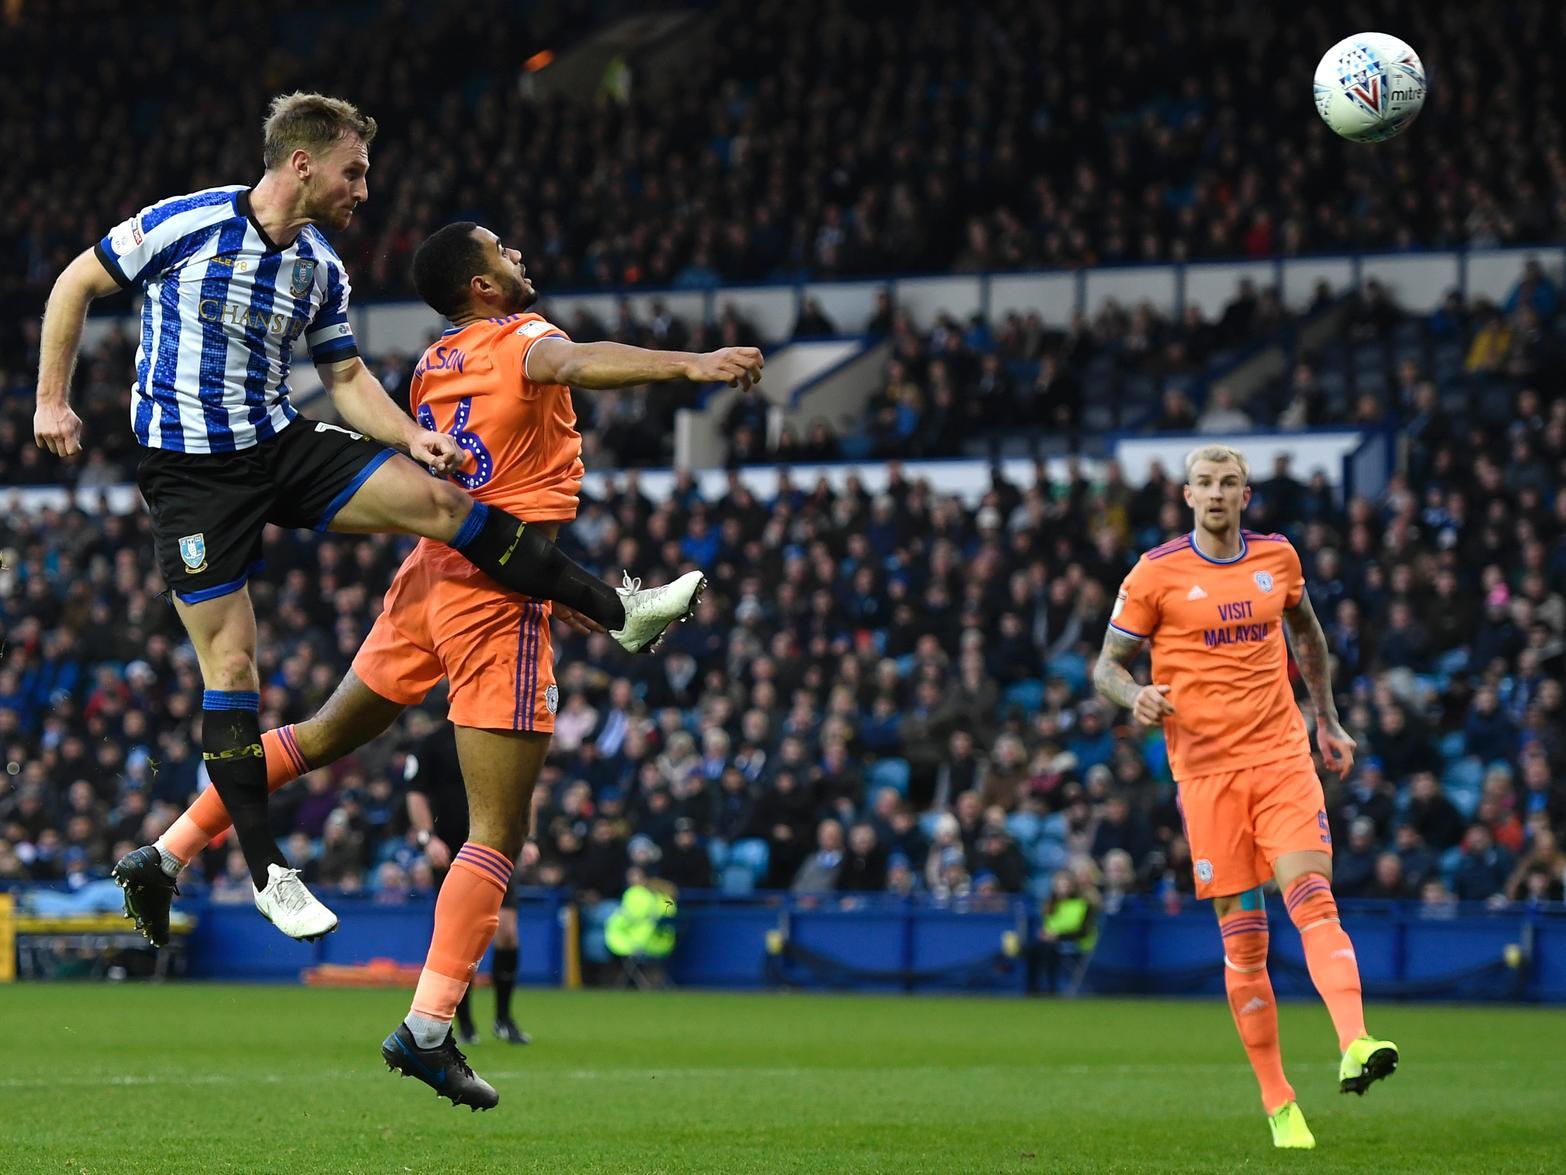 The Owls defender went from midweek hero to weekend zero, with a woeful display against Derby County. He deflected the ball past his goalie for the first goal, and was well out of position for the second in a 3-1 drubbing.